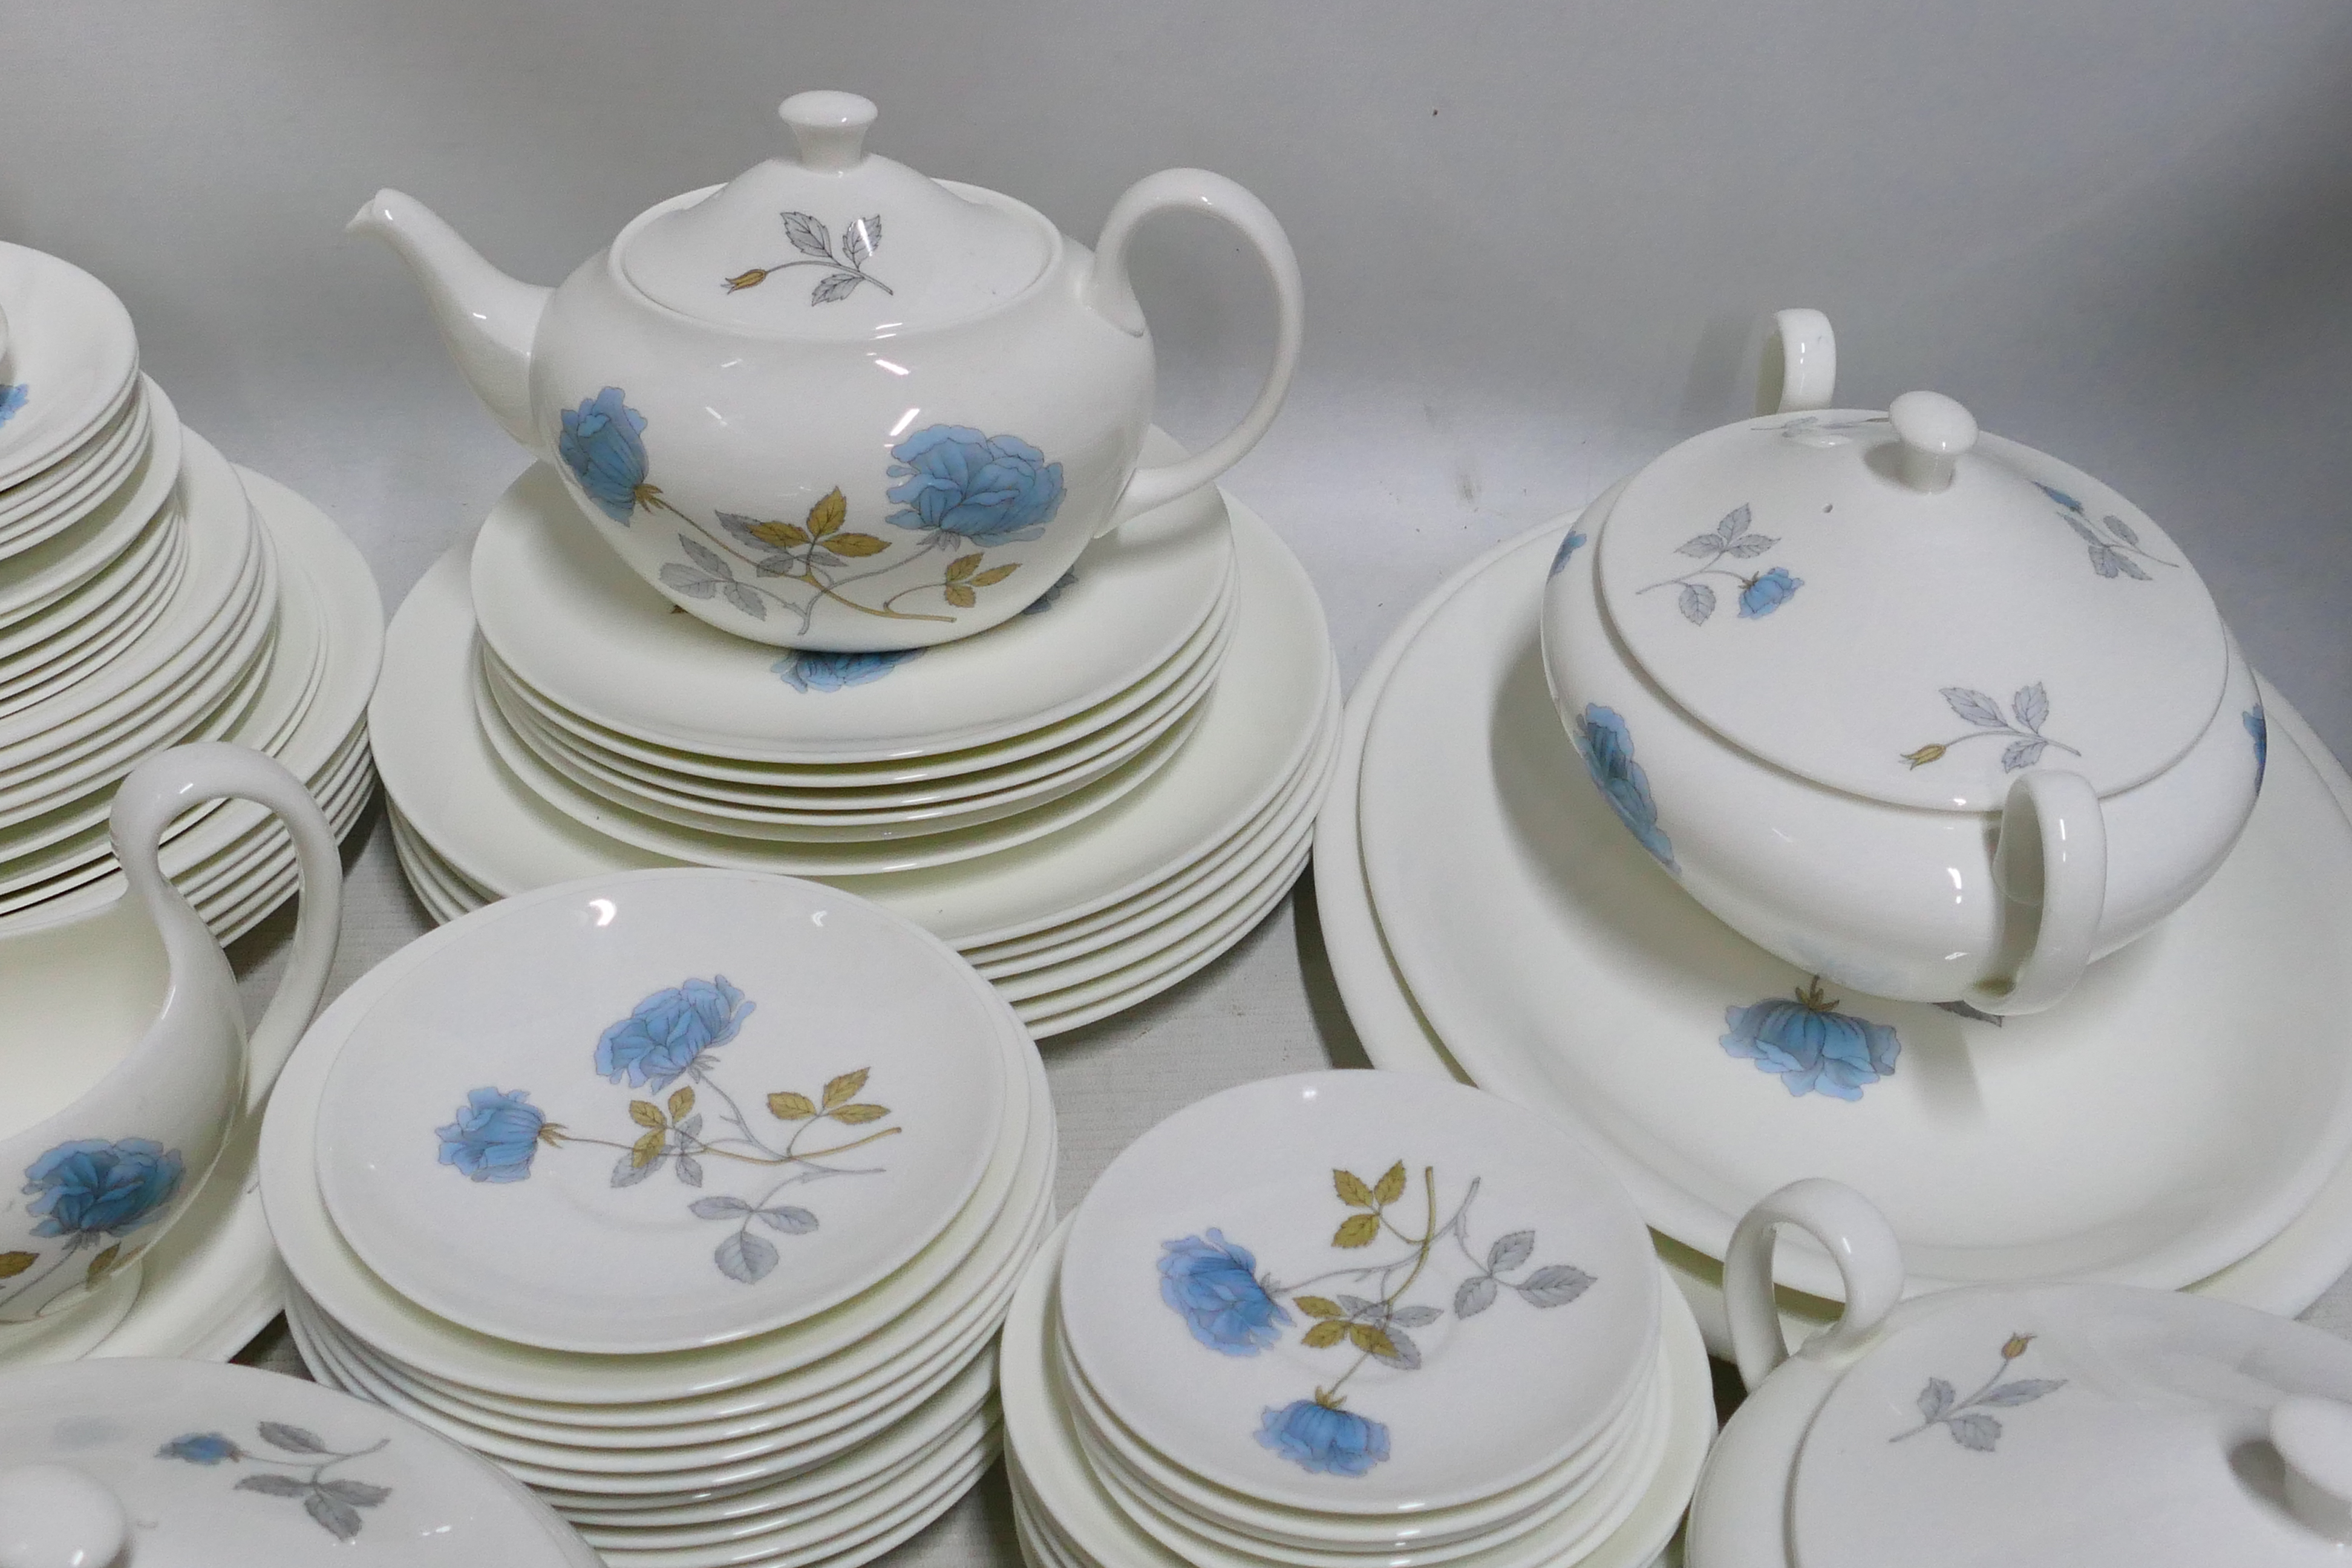 Wedgwood - A large Wedgwood Ice Rose dinner/tea set - Pieces include soup bowls, cream jugs, - Image 7 of 10